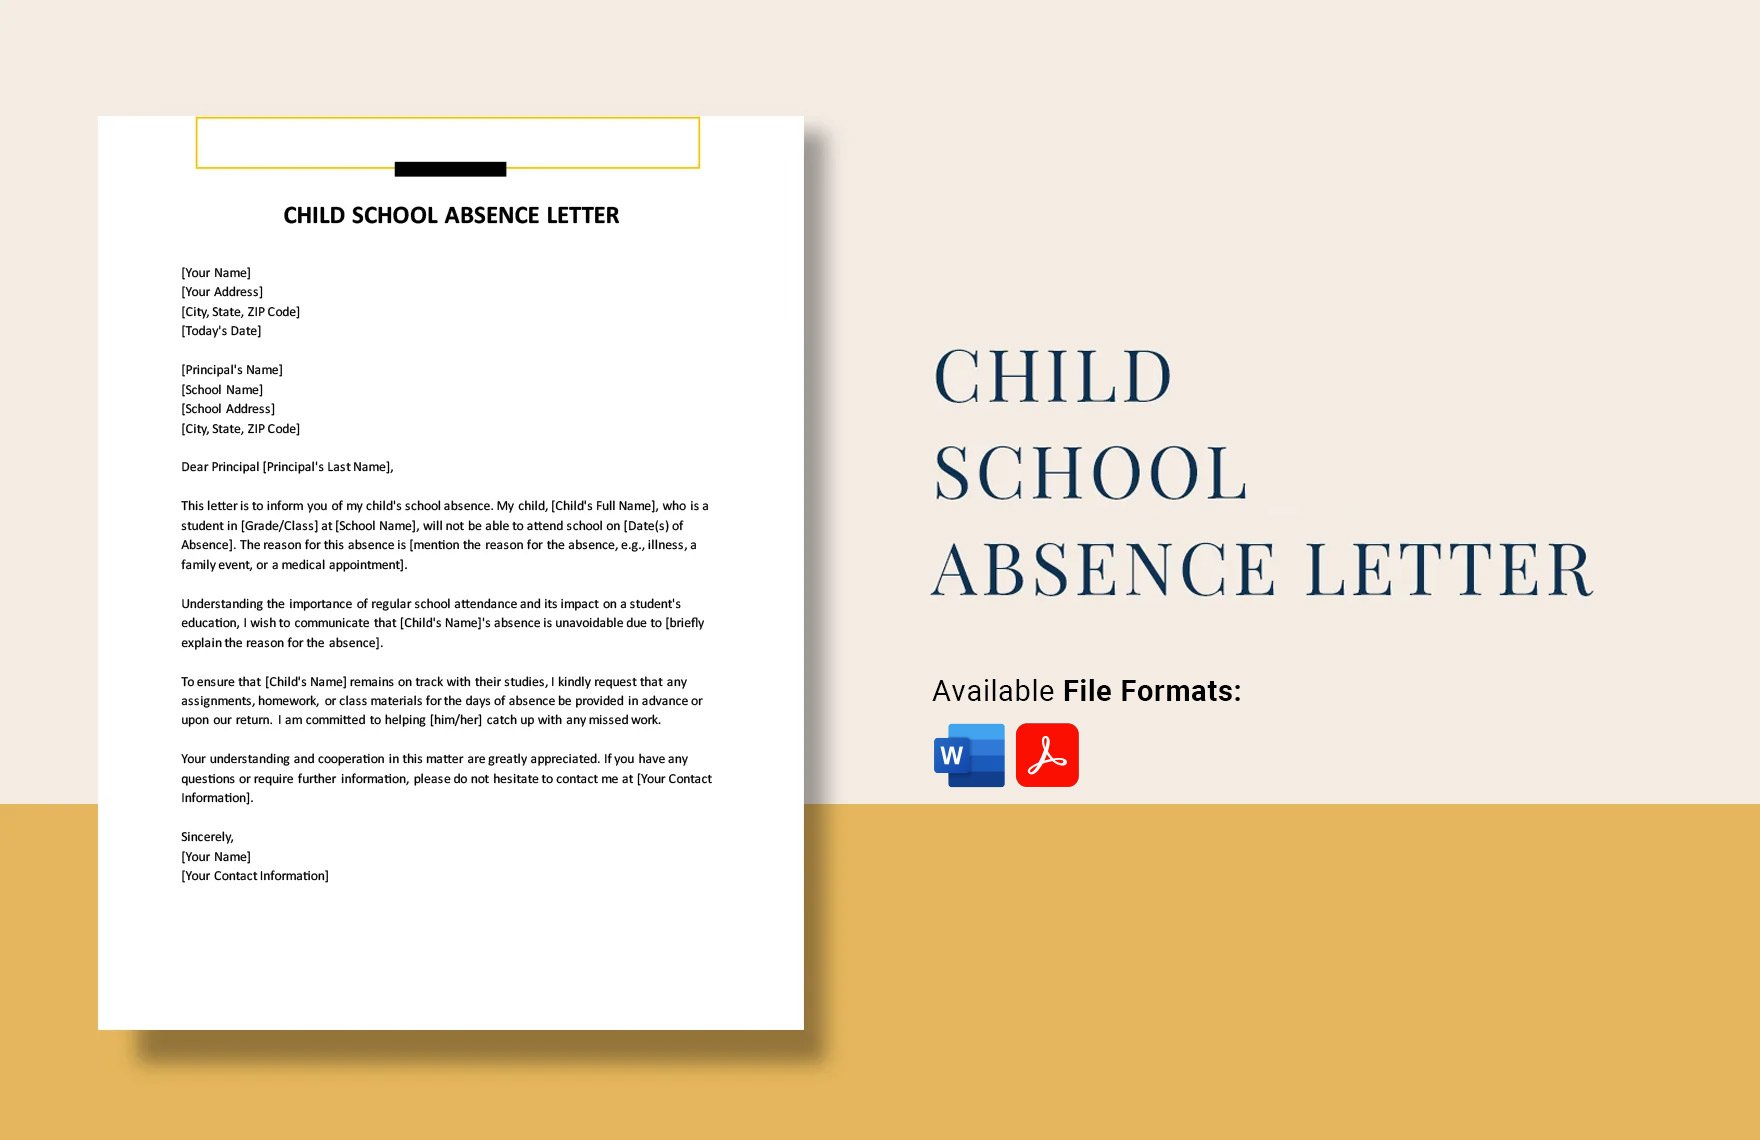 Child School Absence Letter in Word, PDF